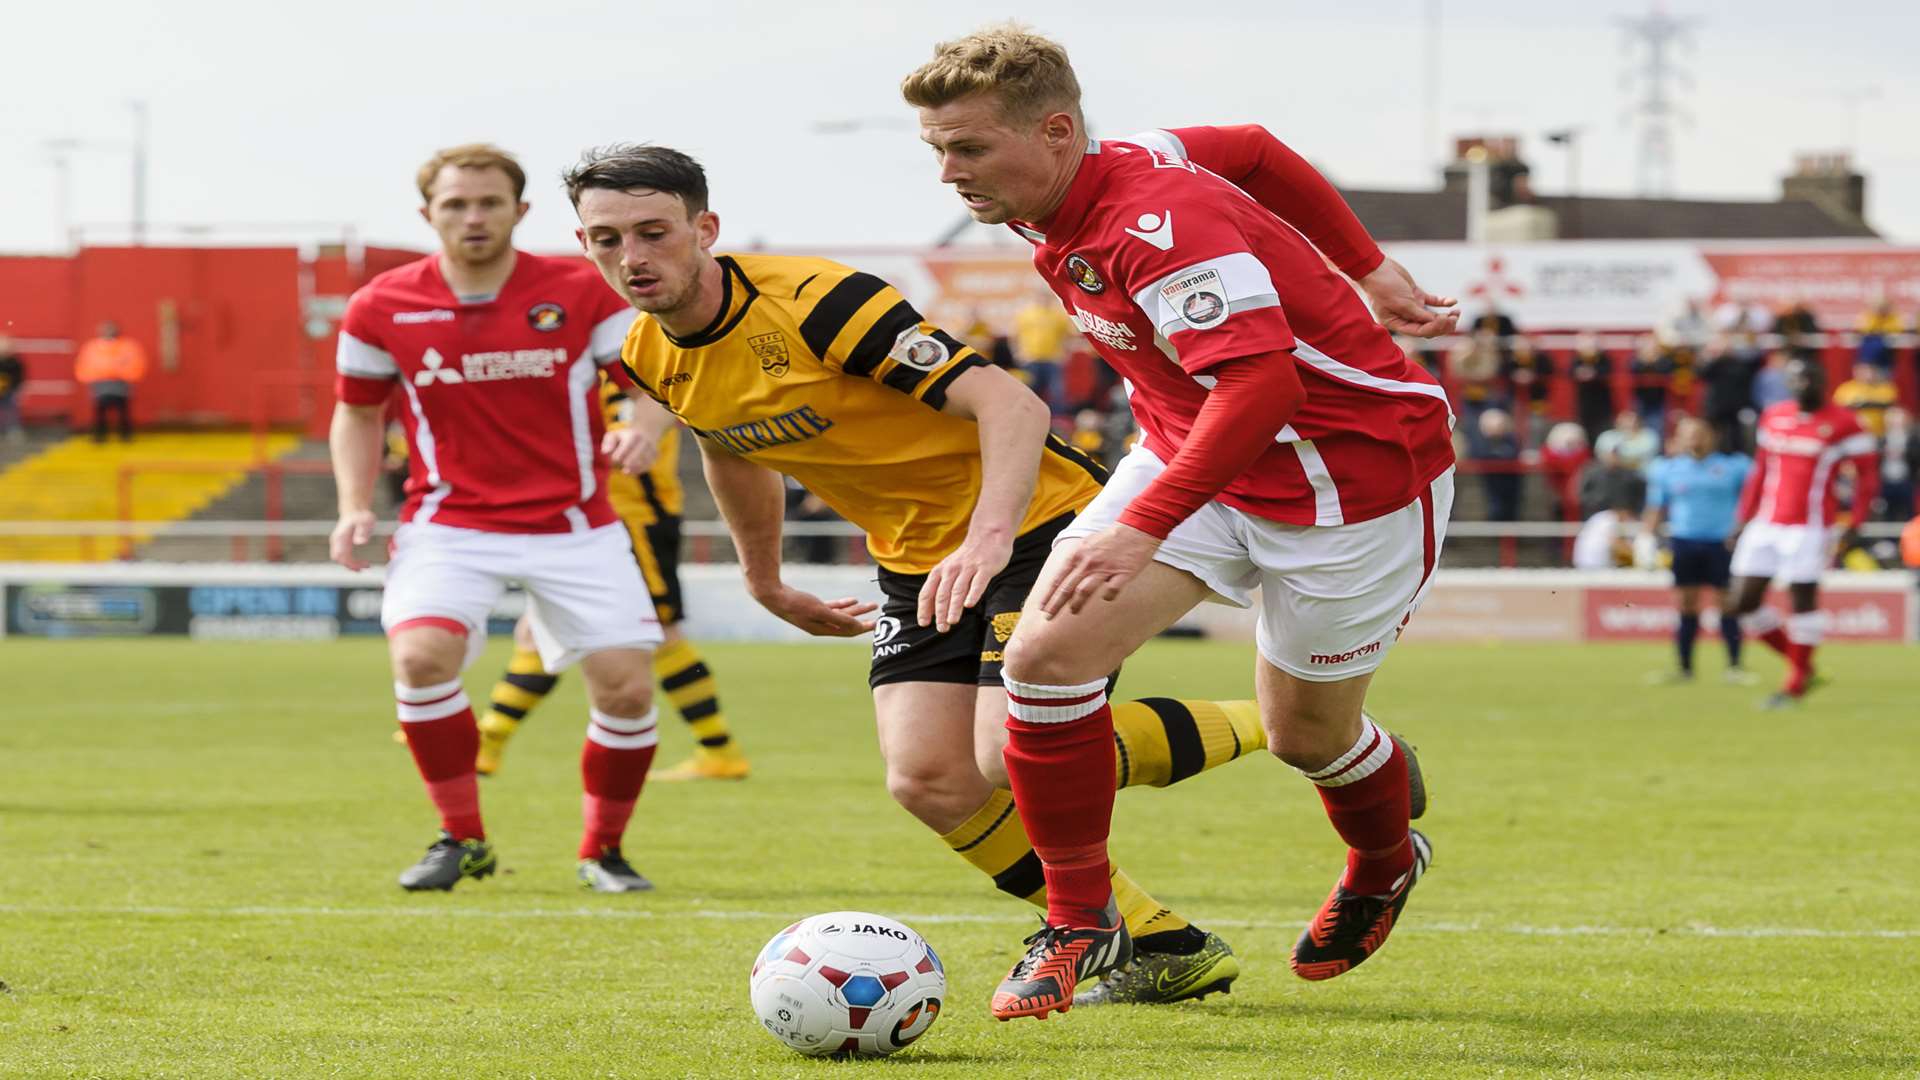 Jordan Parkes in action for Fleet in last season's play-off final defeat to Maidstone. Picture: Andy Payton